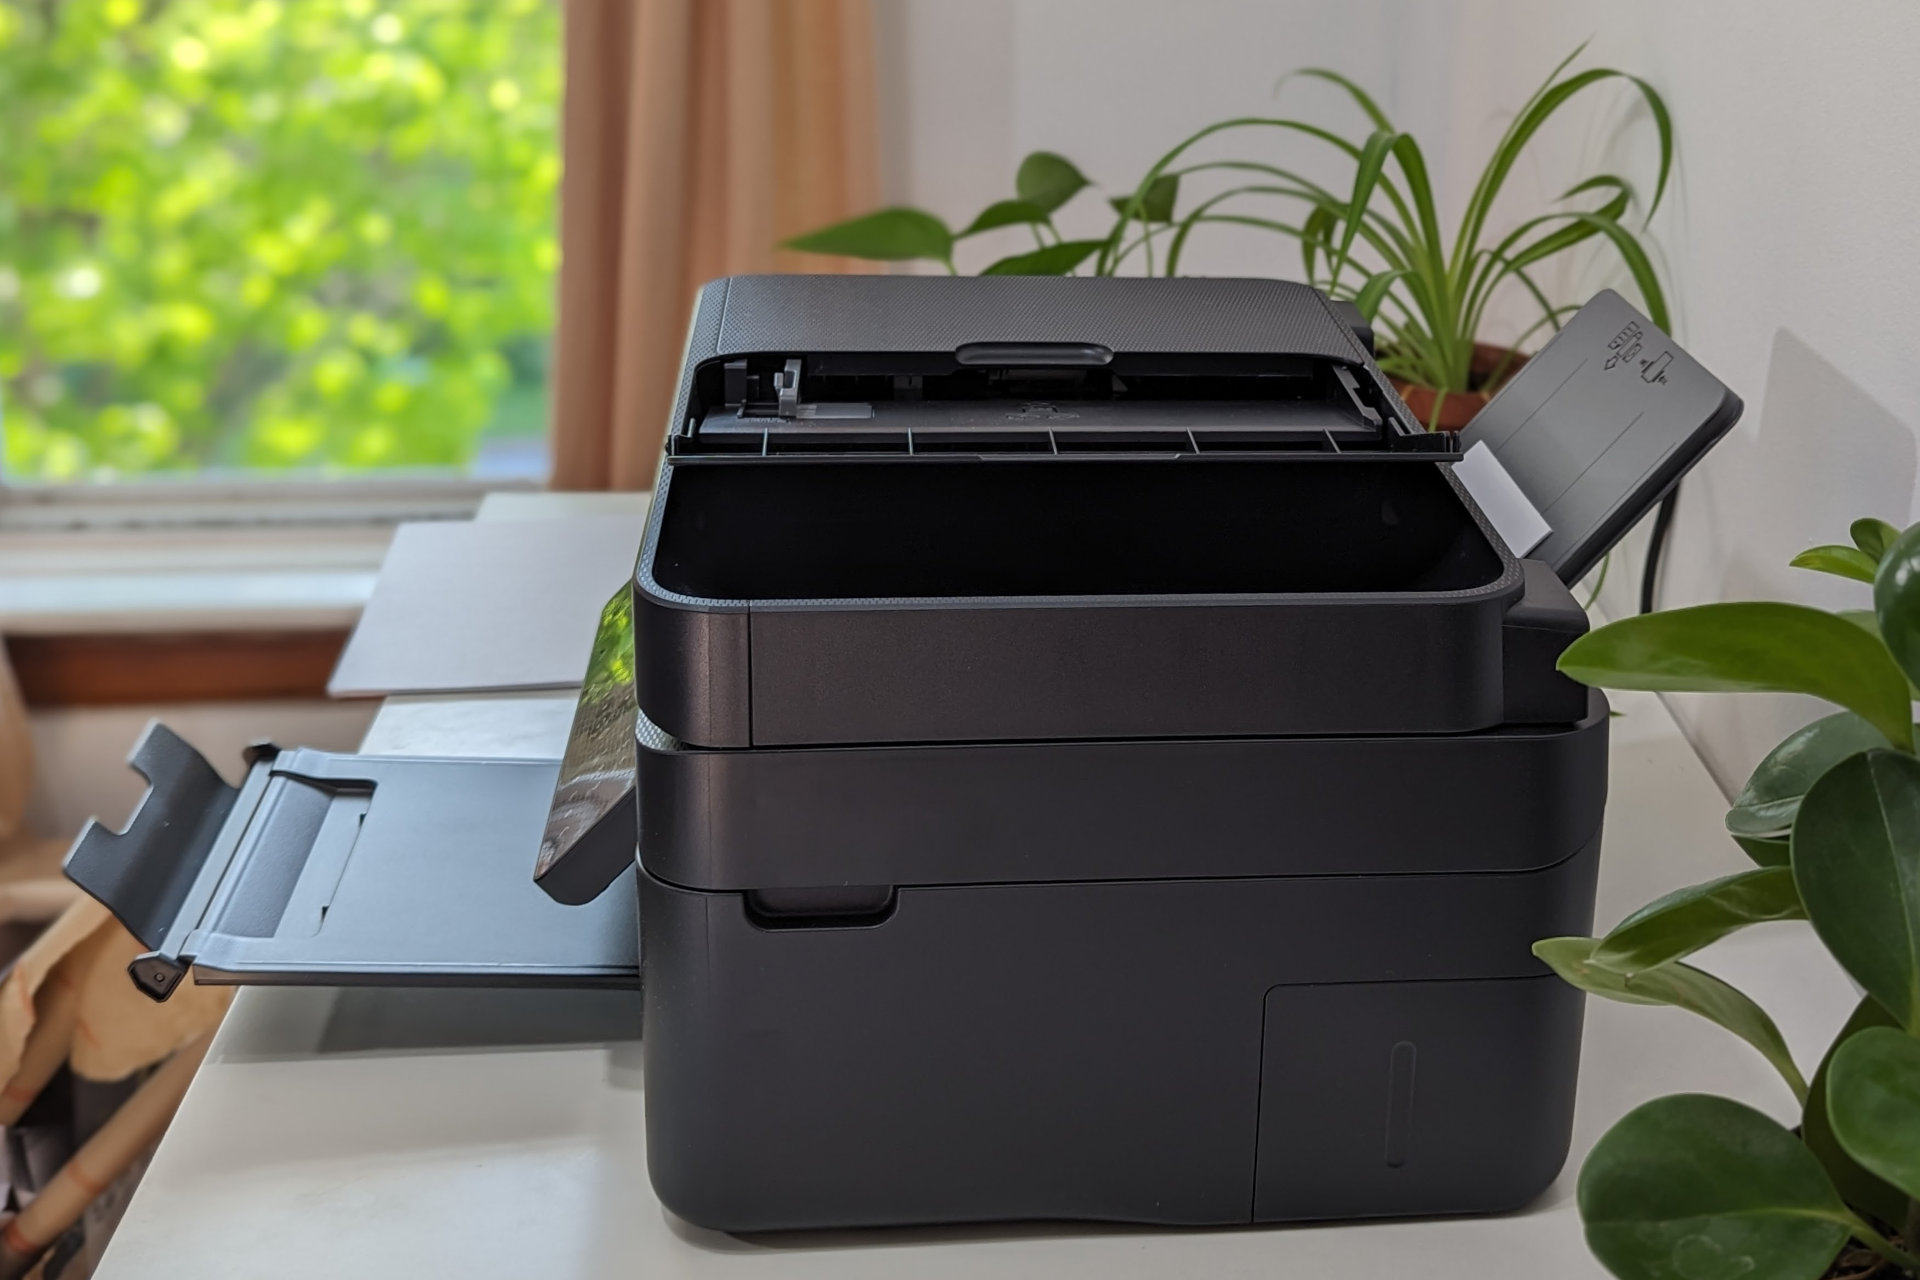 A side view of the Epson WorkForce WF-2930 shows the paper tray is a bit hidden from the front.